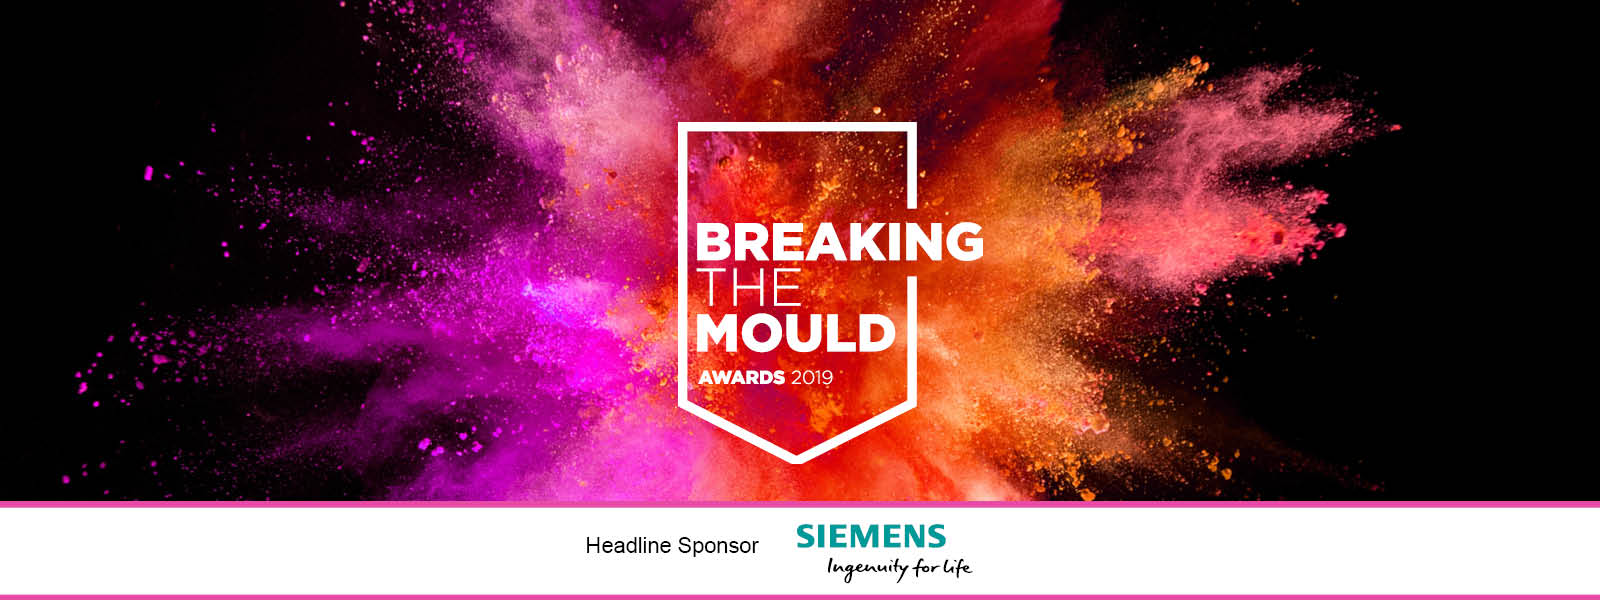 Breaking the mould banner